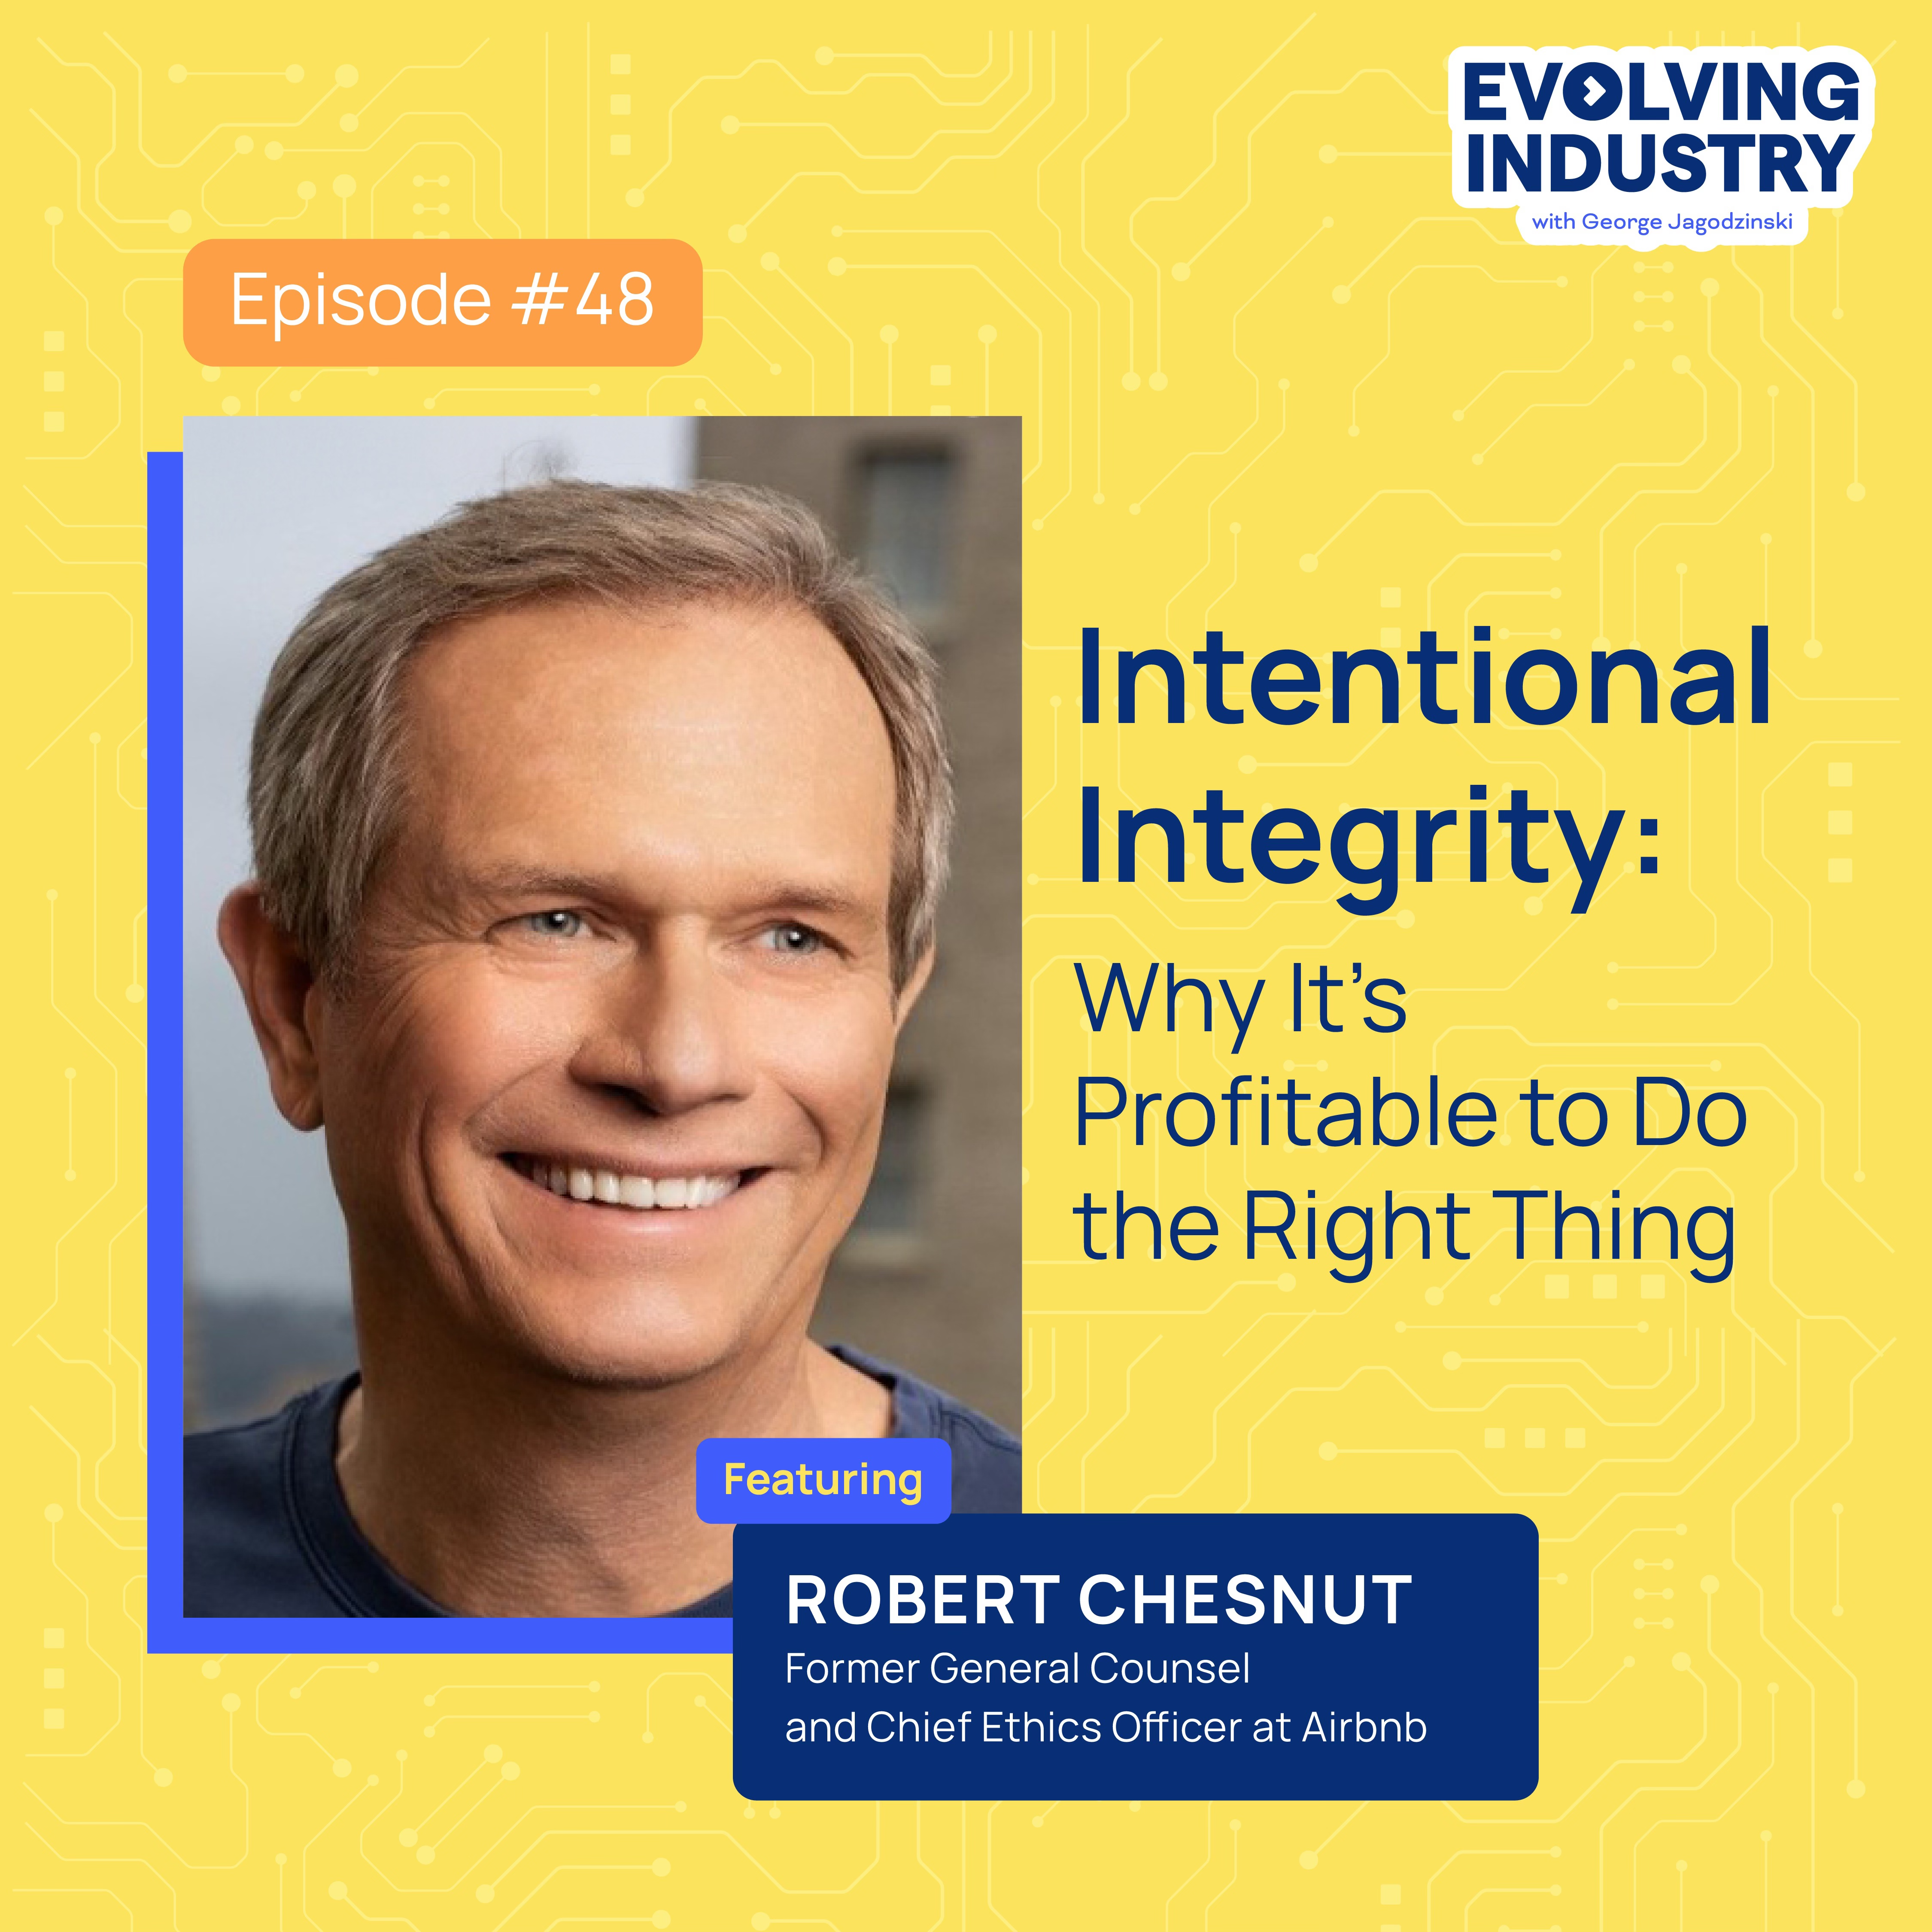 Intentional Integrity: Why It’s Profitable to Do the Right Thing